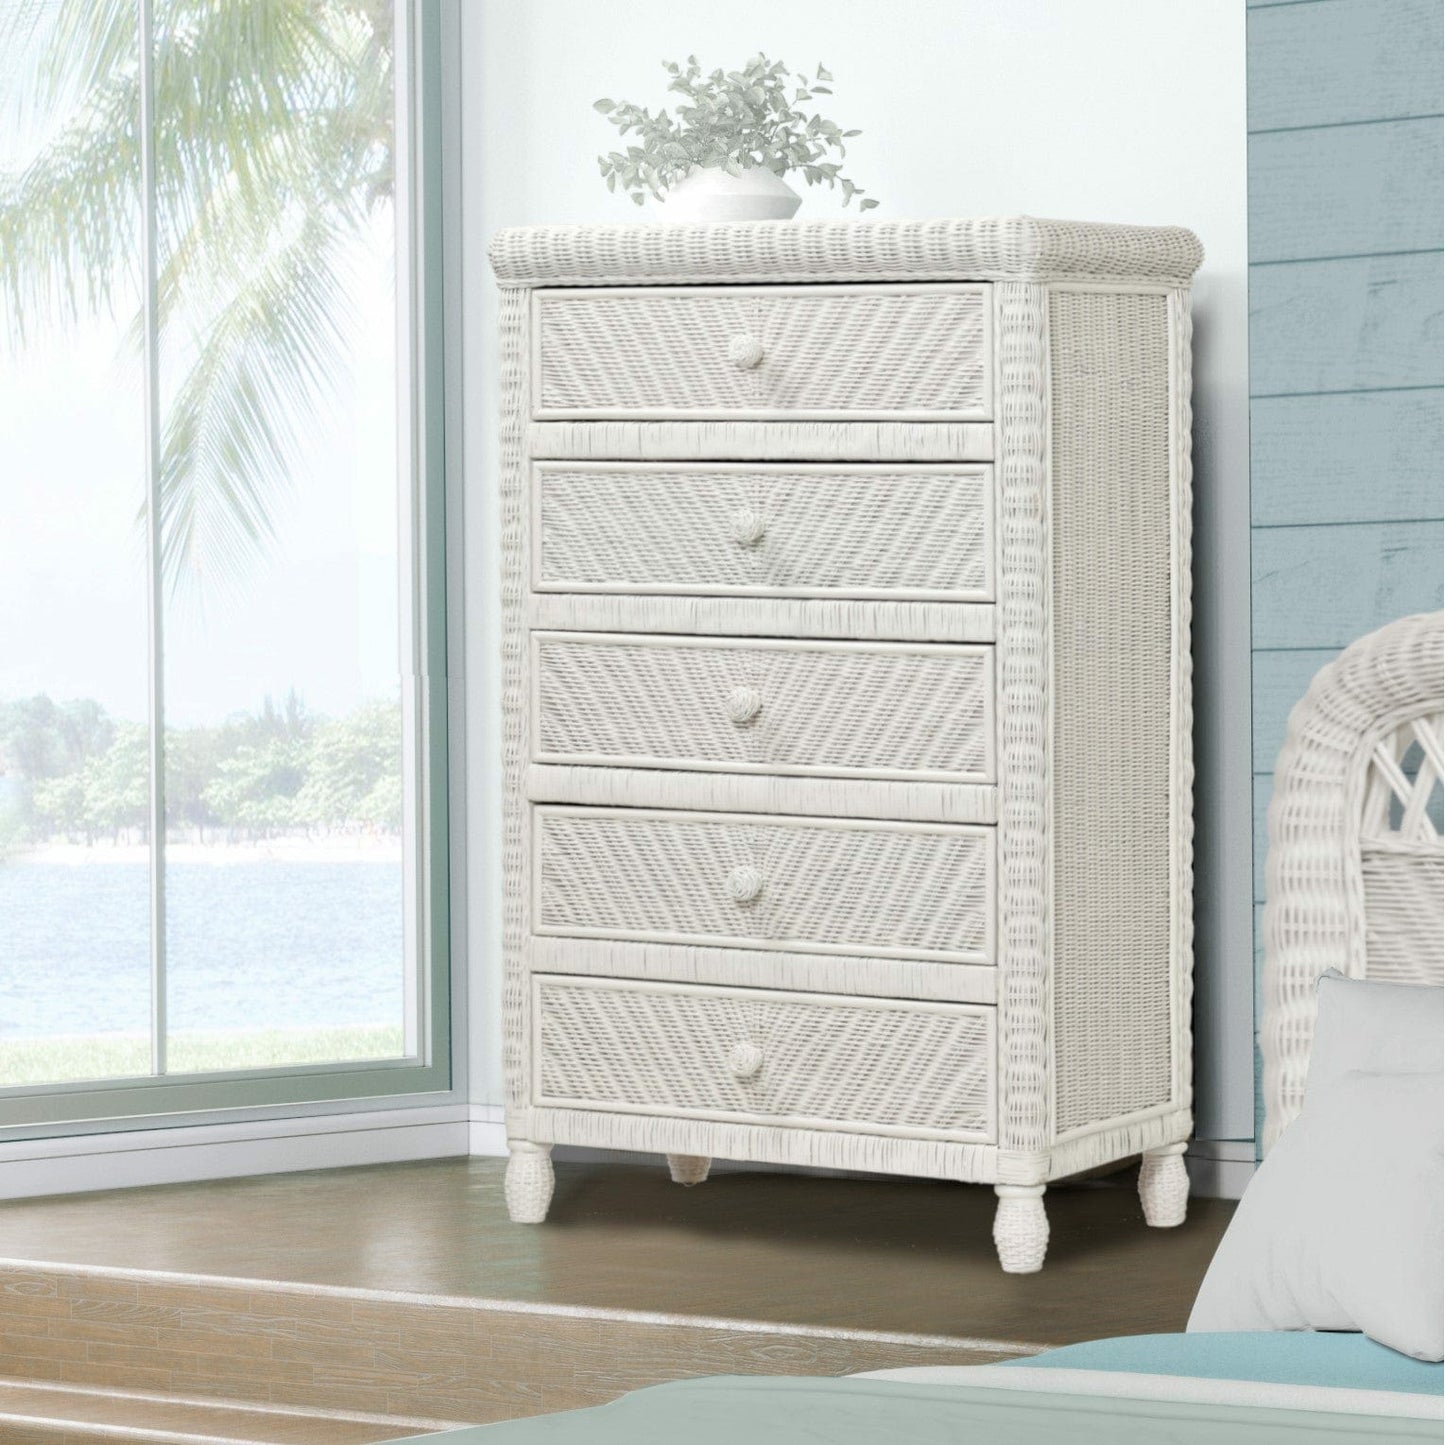 Sea Winds Trading Santa Cruz 5 Drawer Chest w/ Glass Top B57935 Indoor Sea Winds Trading Co 